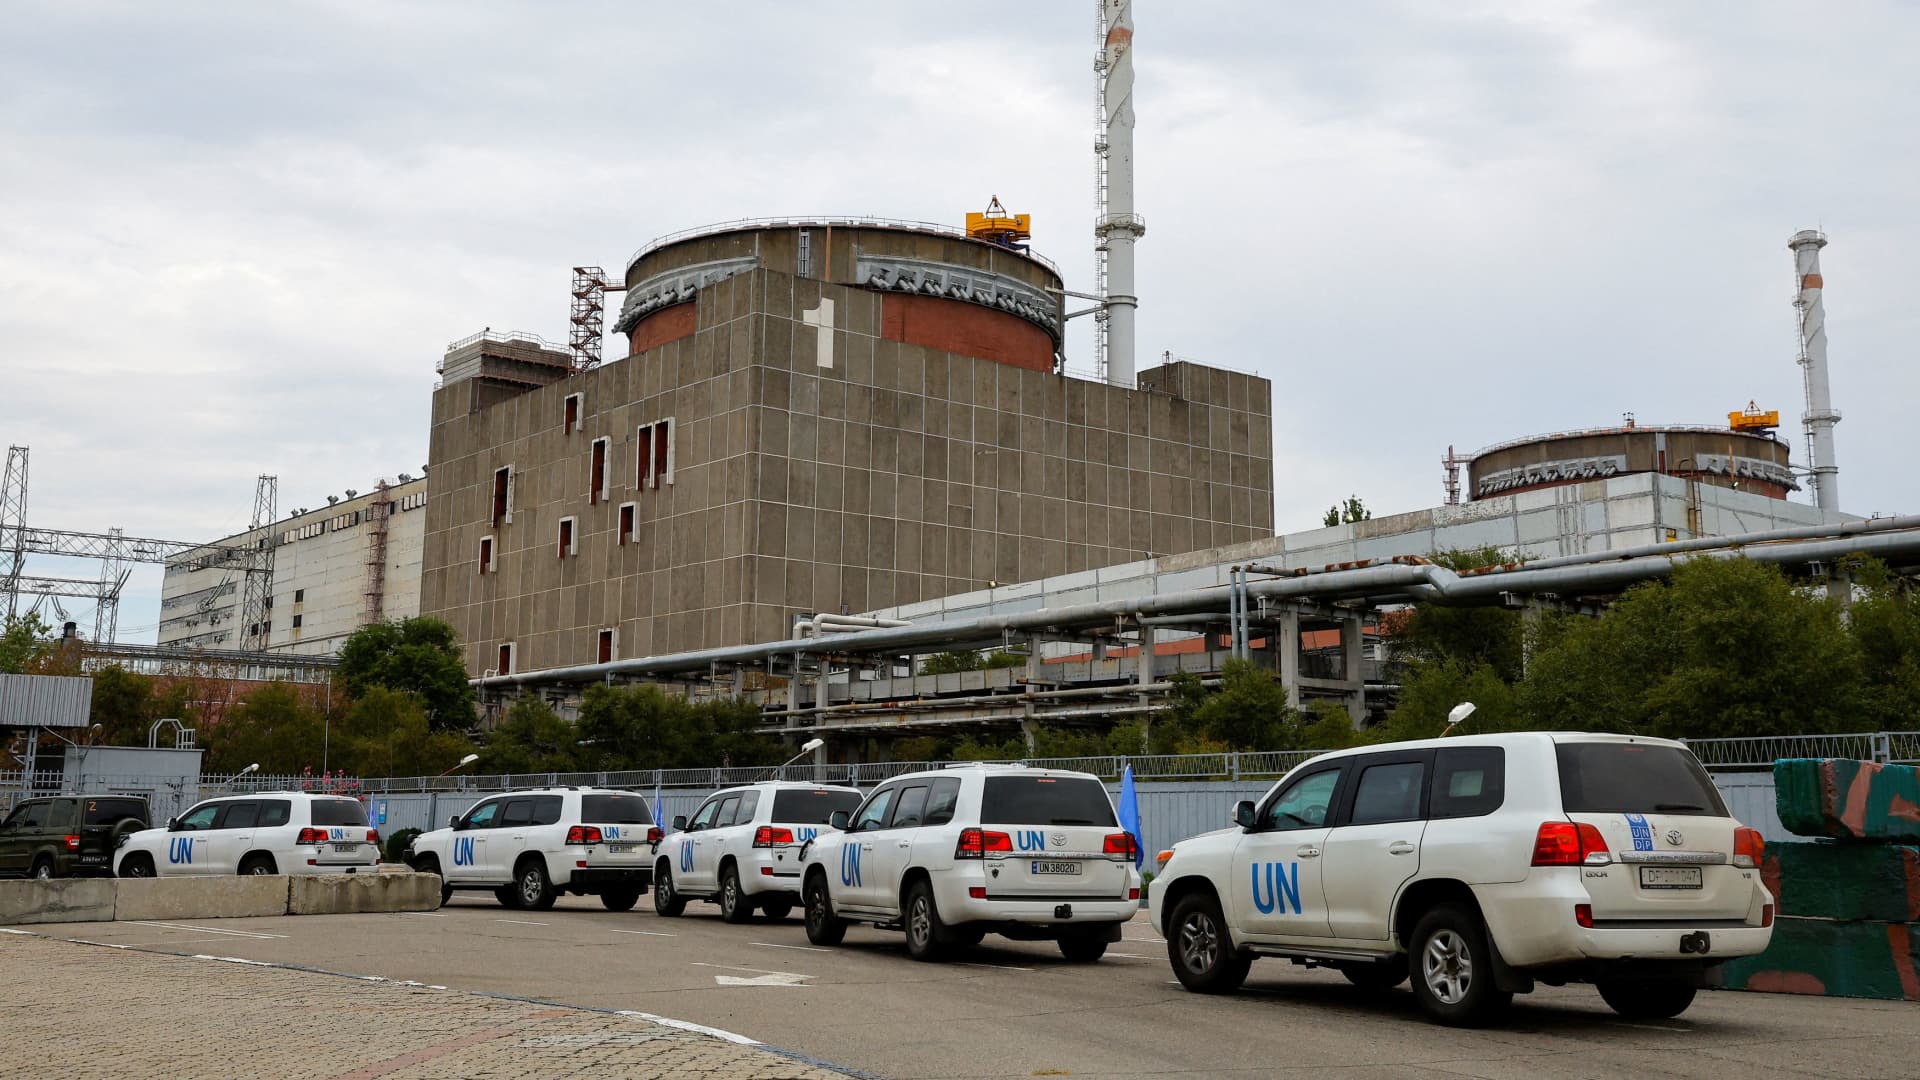 A motorcade transporting the International Atomic Energy Agency (IAEA) expert mission, escorted by the Russian military, arrives at the Zaporizhzhia Nuclear Power Plant in the course of Ukraine-Russia conflict outside Enerhodar in the Zaporizhzhia region, Ukraine, September 1, 2022.